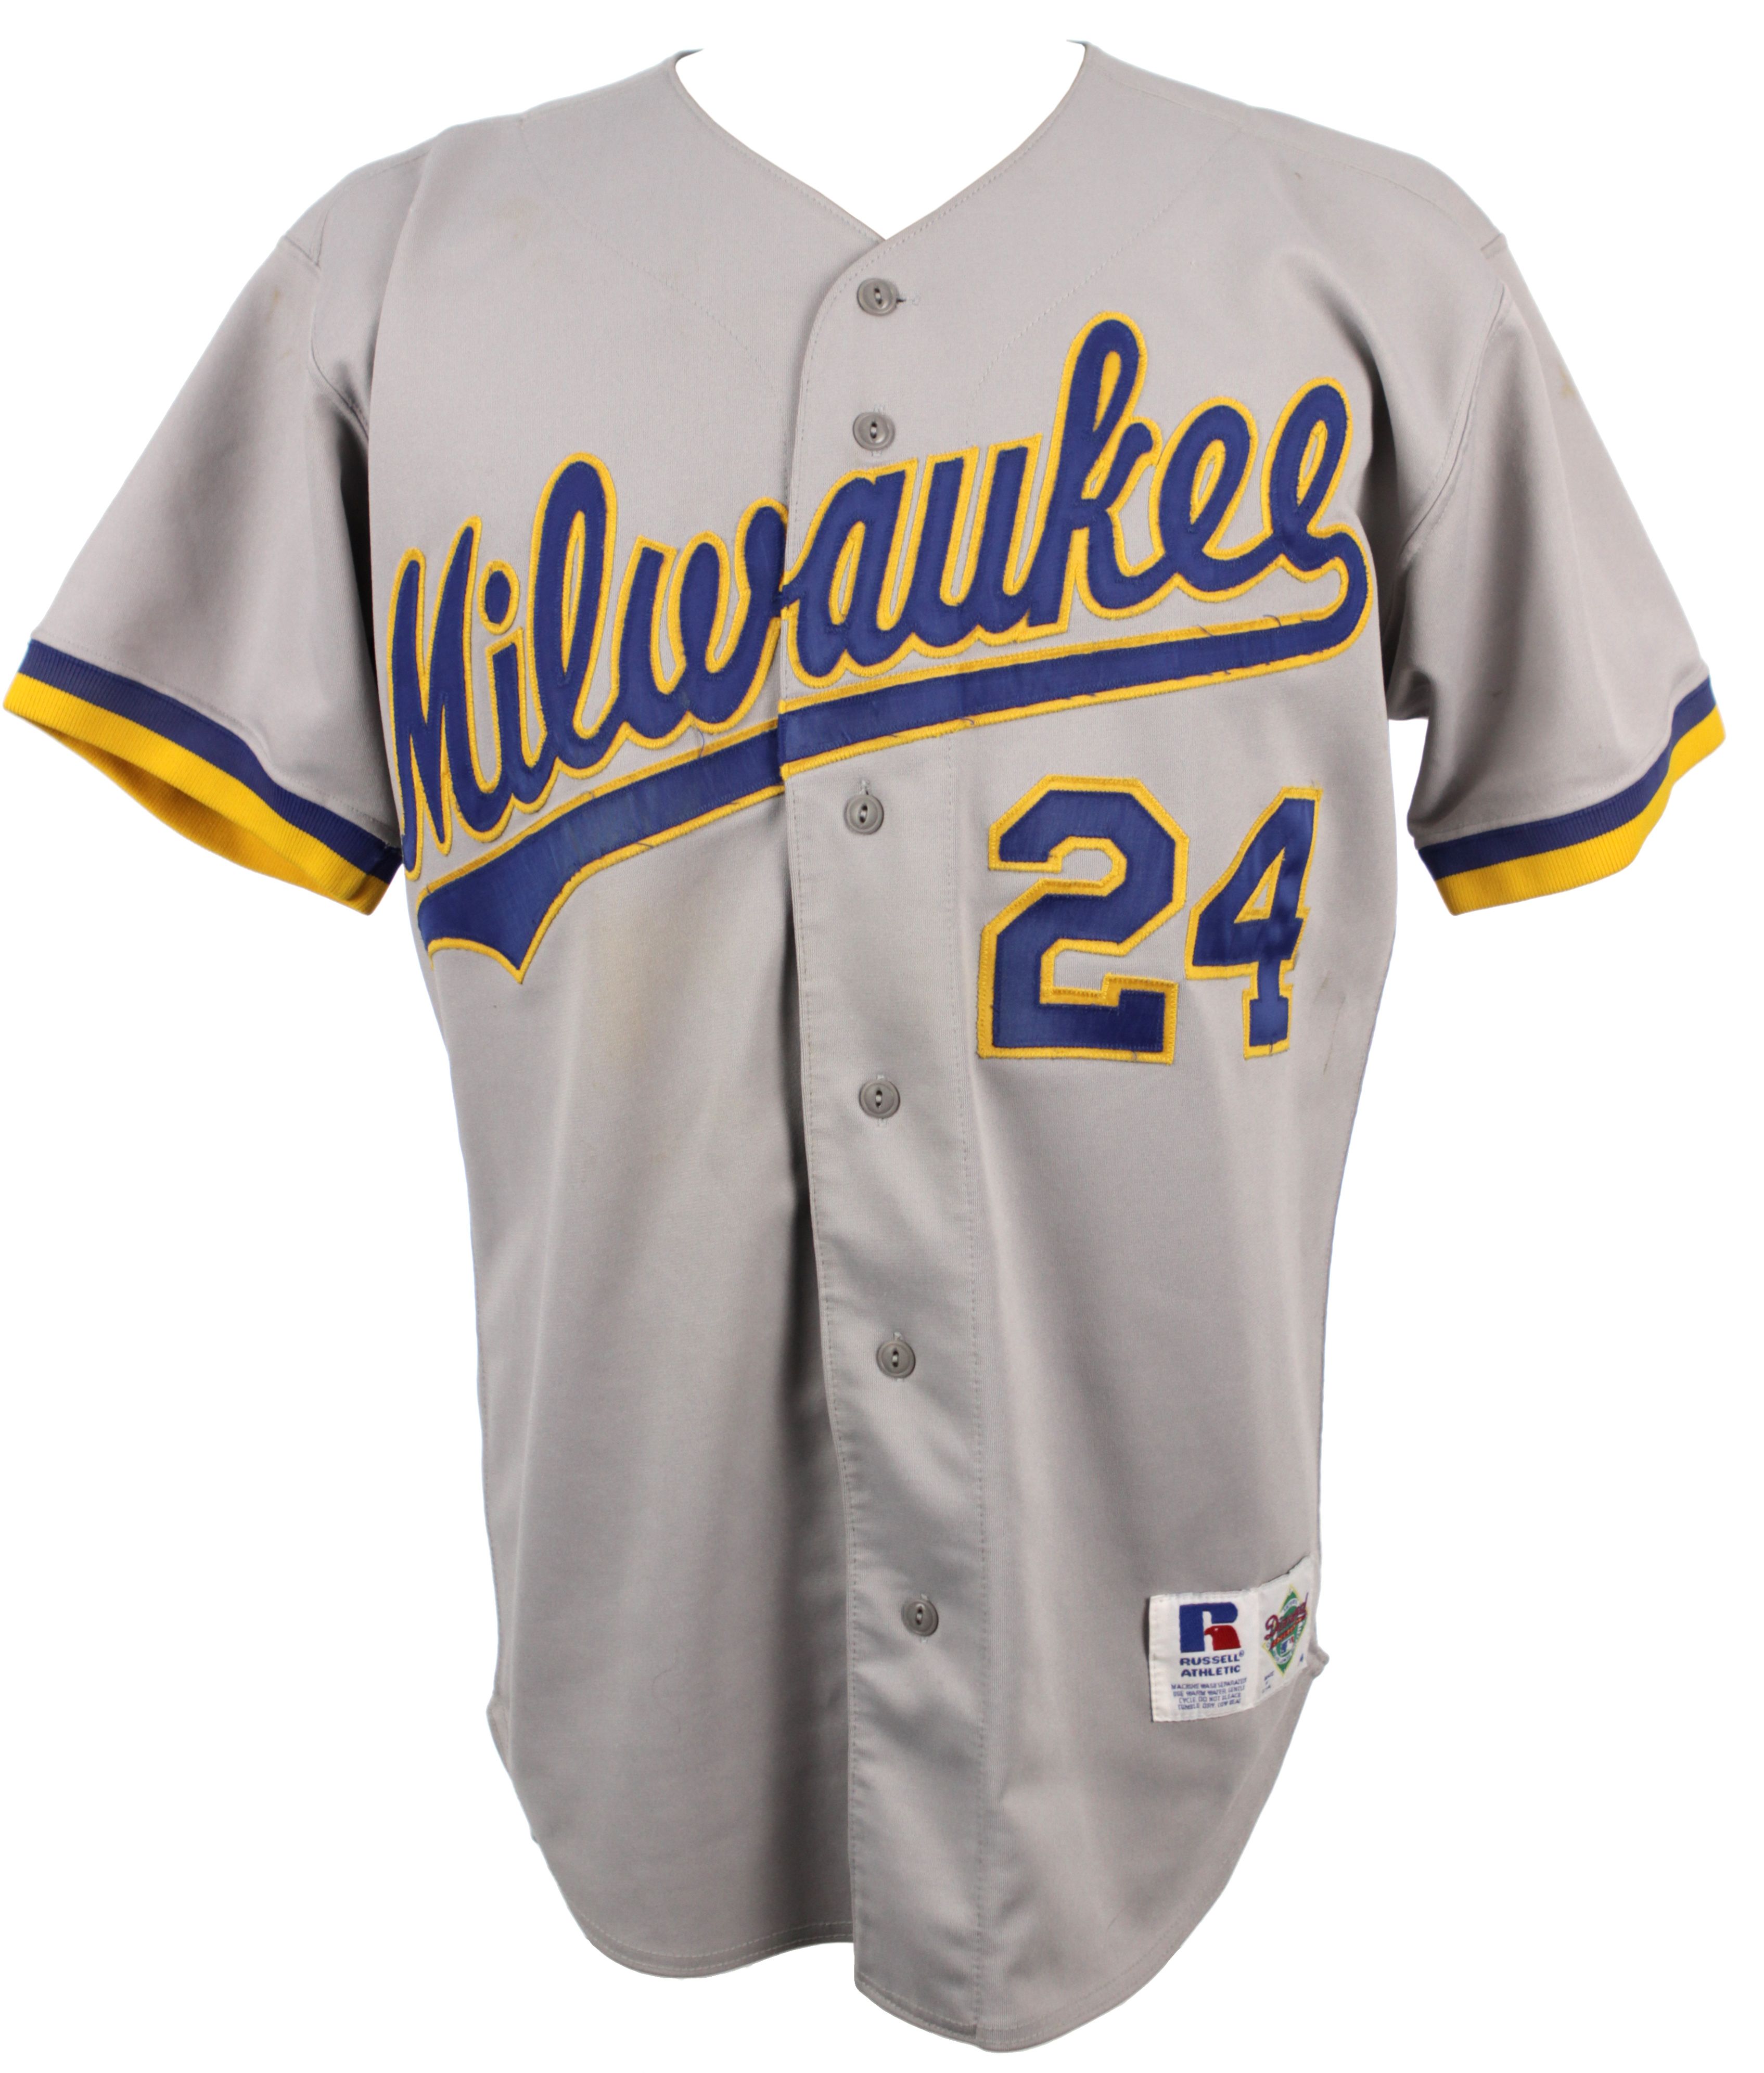 90s brewers jersey